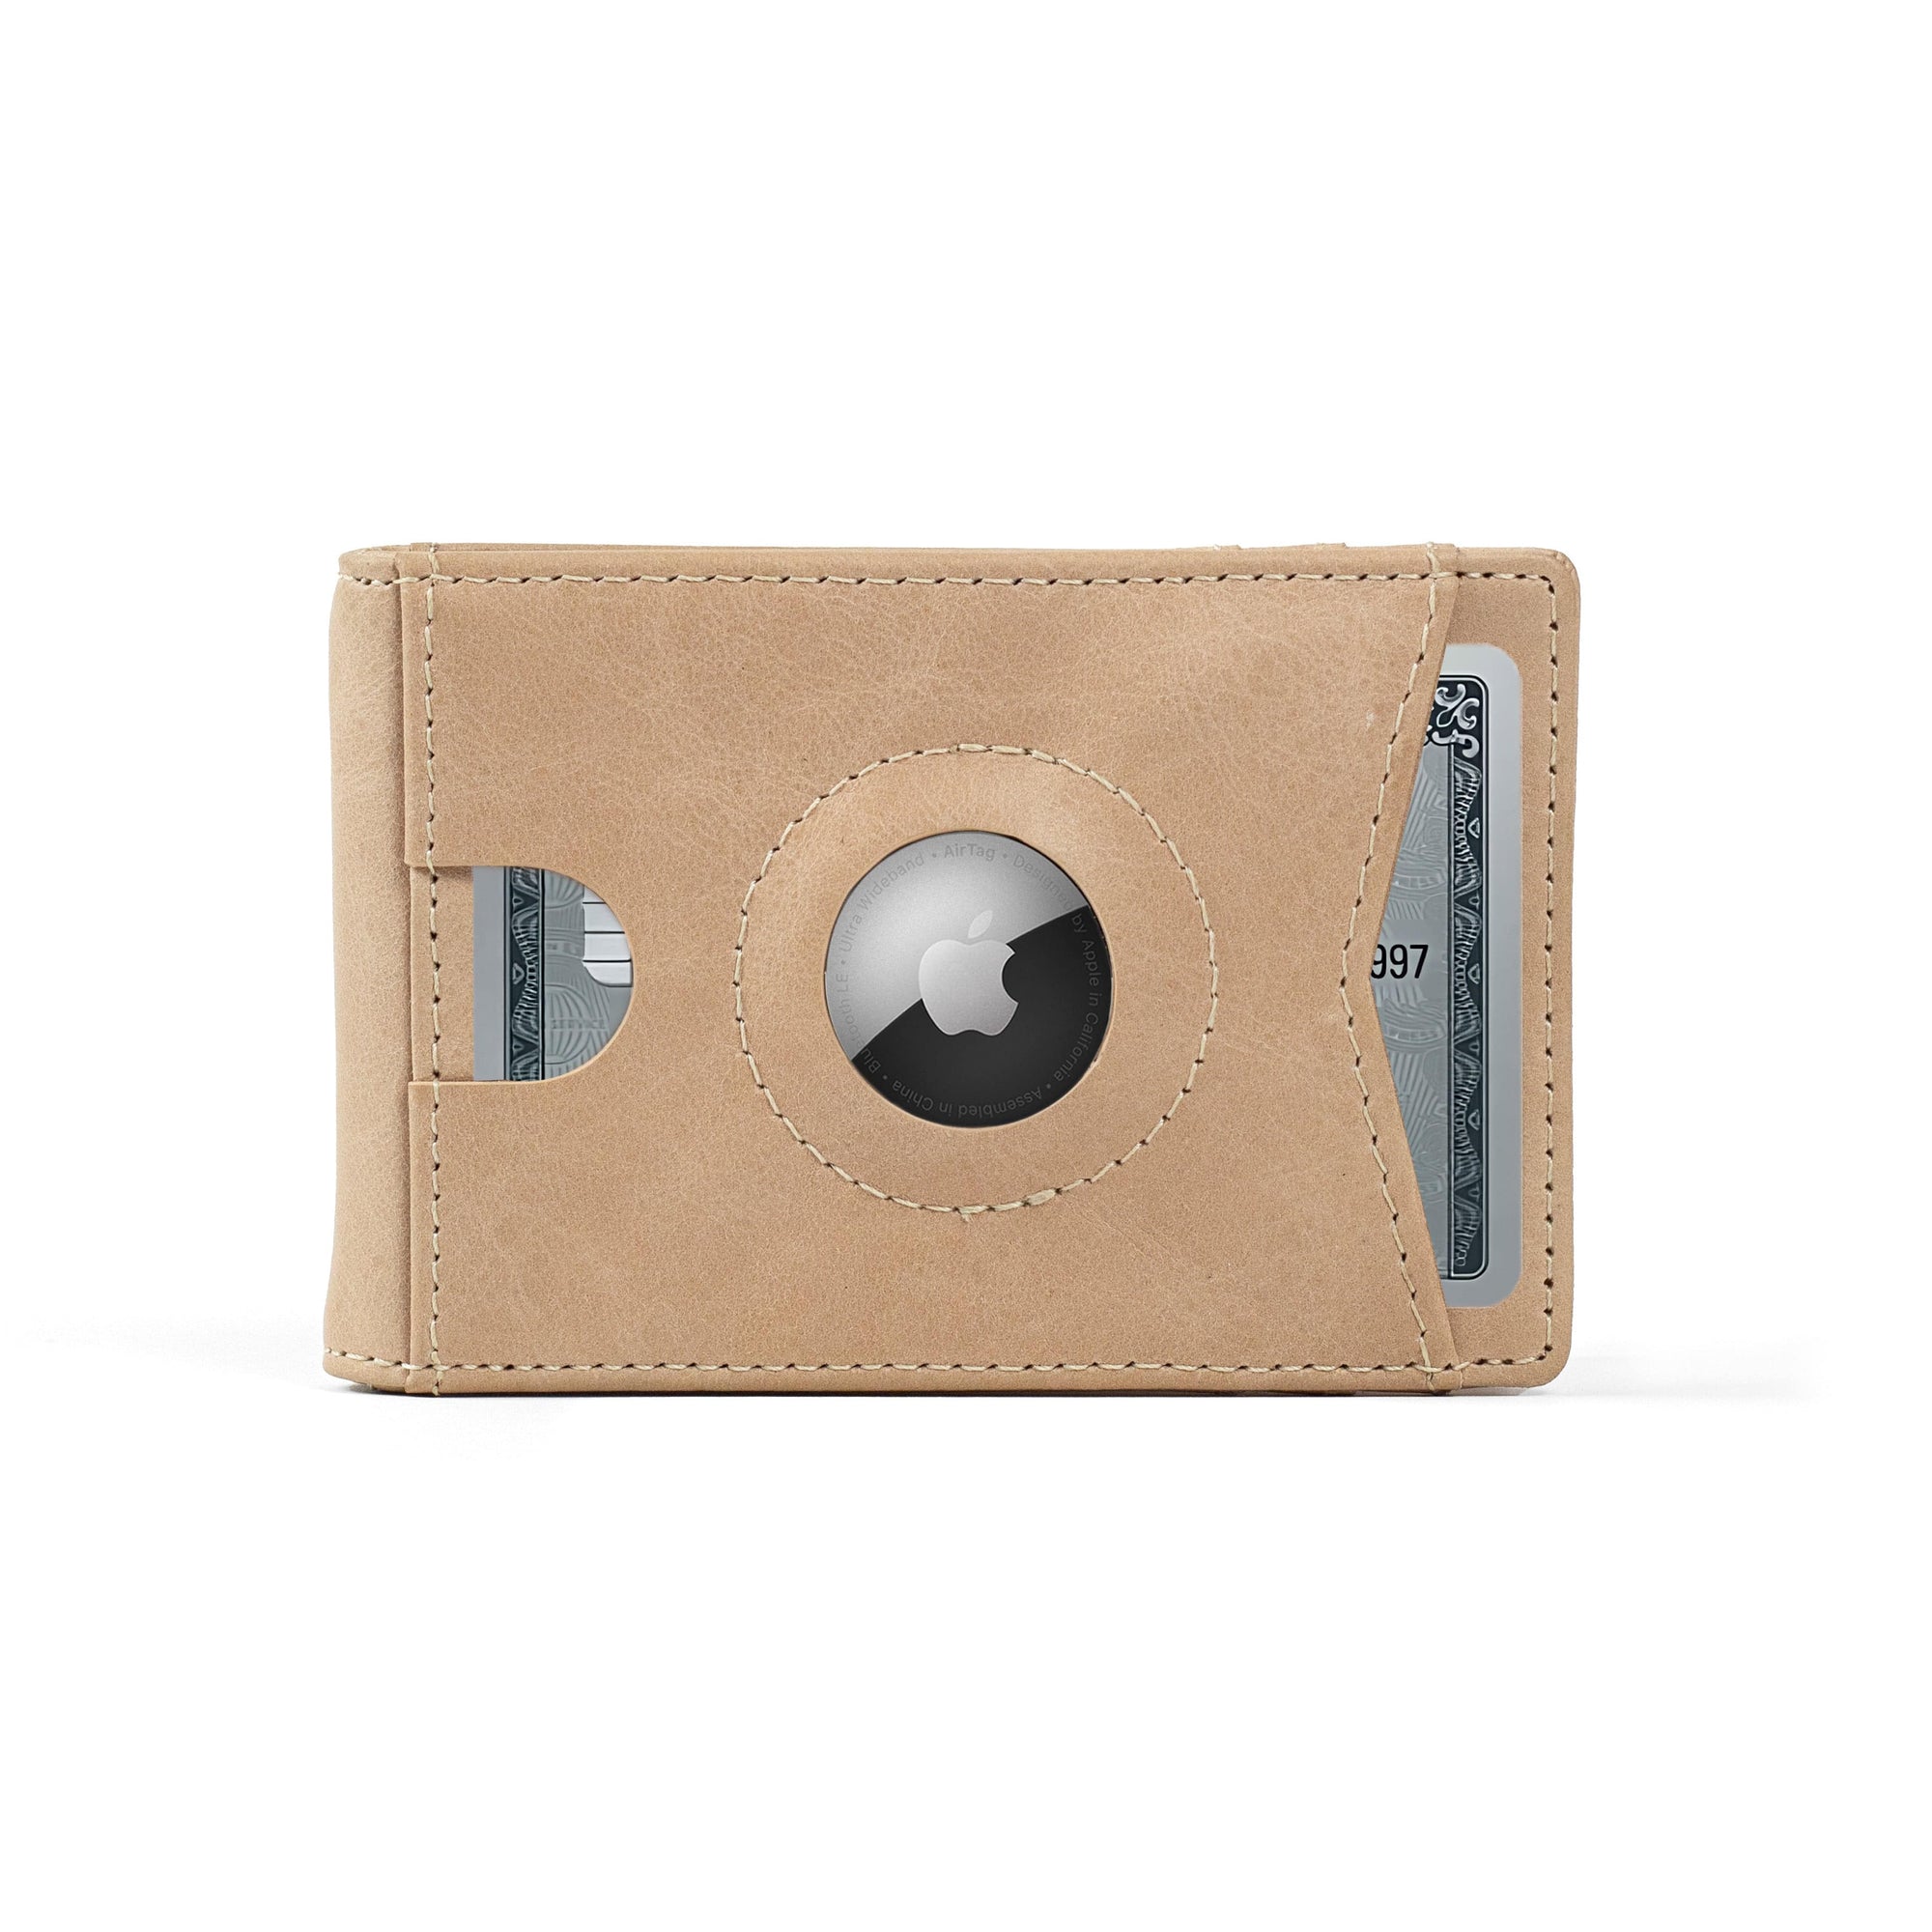 Sand Dune The Bifold Monetial | AirTag Premium Leather Wallet | RFID Blocking | Slim Leather Wallet